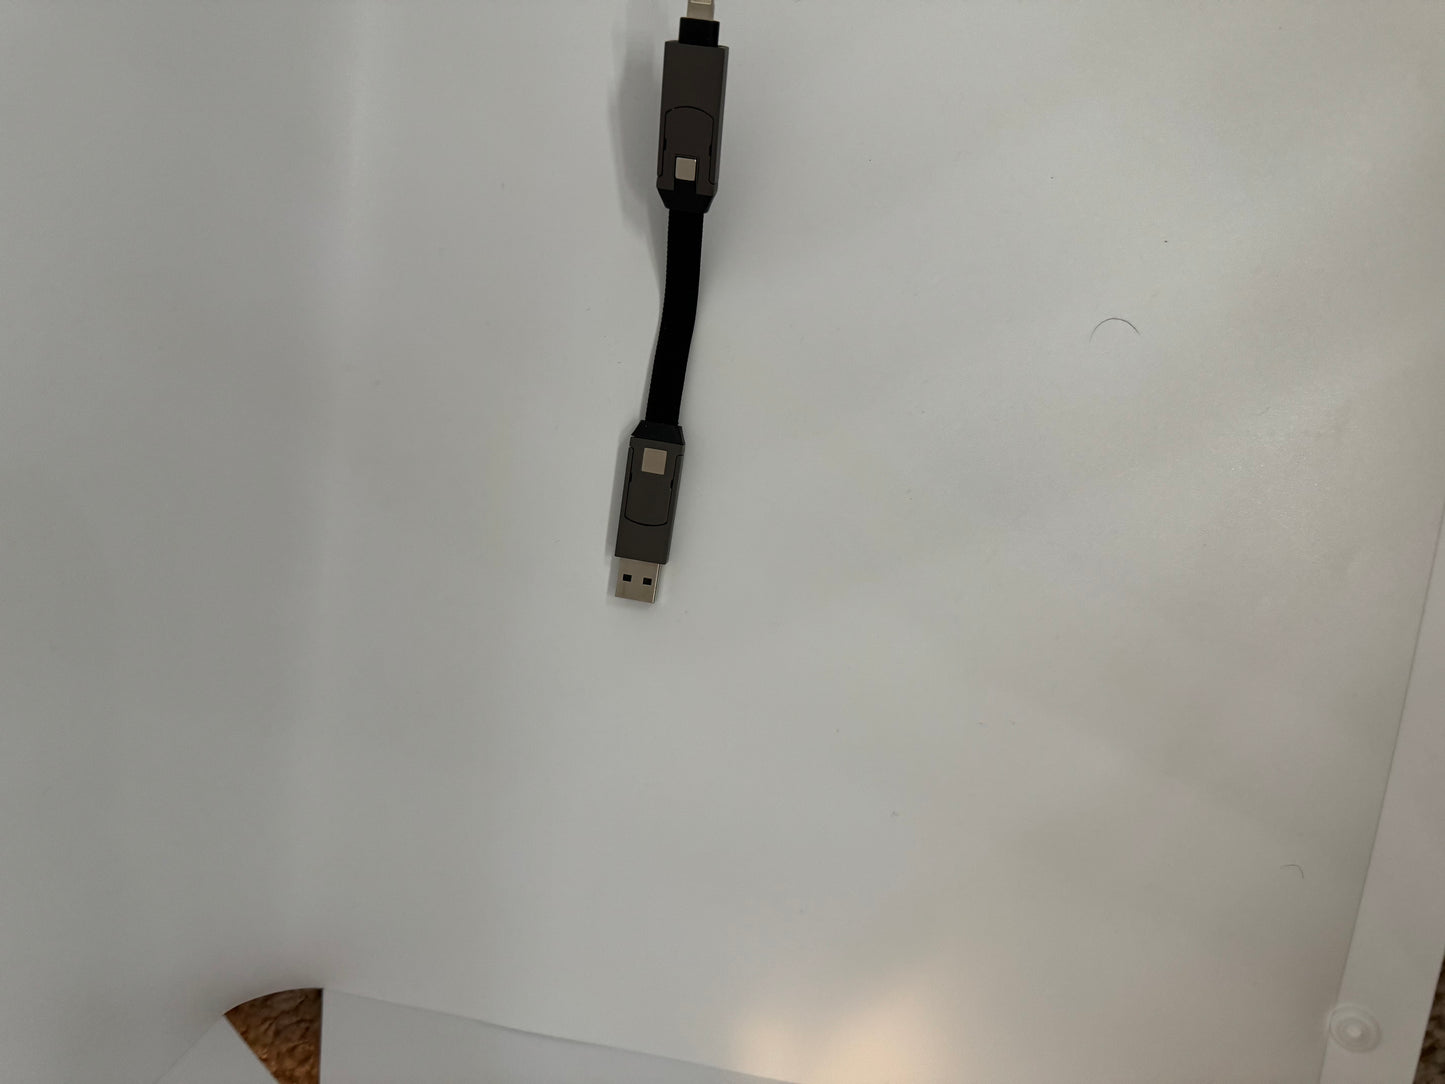 The picture shows a USB cable against a white background. The cable is black and flat. On the left side of the image, the cable has a standard USB connector, and on the right side, it has a smaller connector, possibly a micro USB or USB-C. The cable is entering the frame from the top left corner and exiting through the bottom right corner. There is also a small, curved black line or object on the white background near the center of the image.